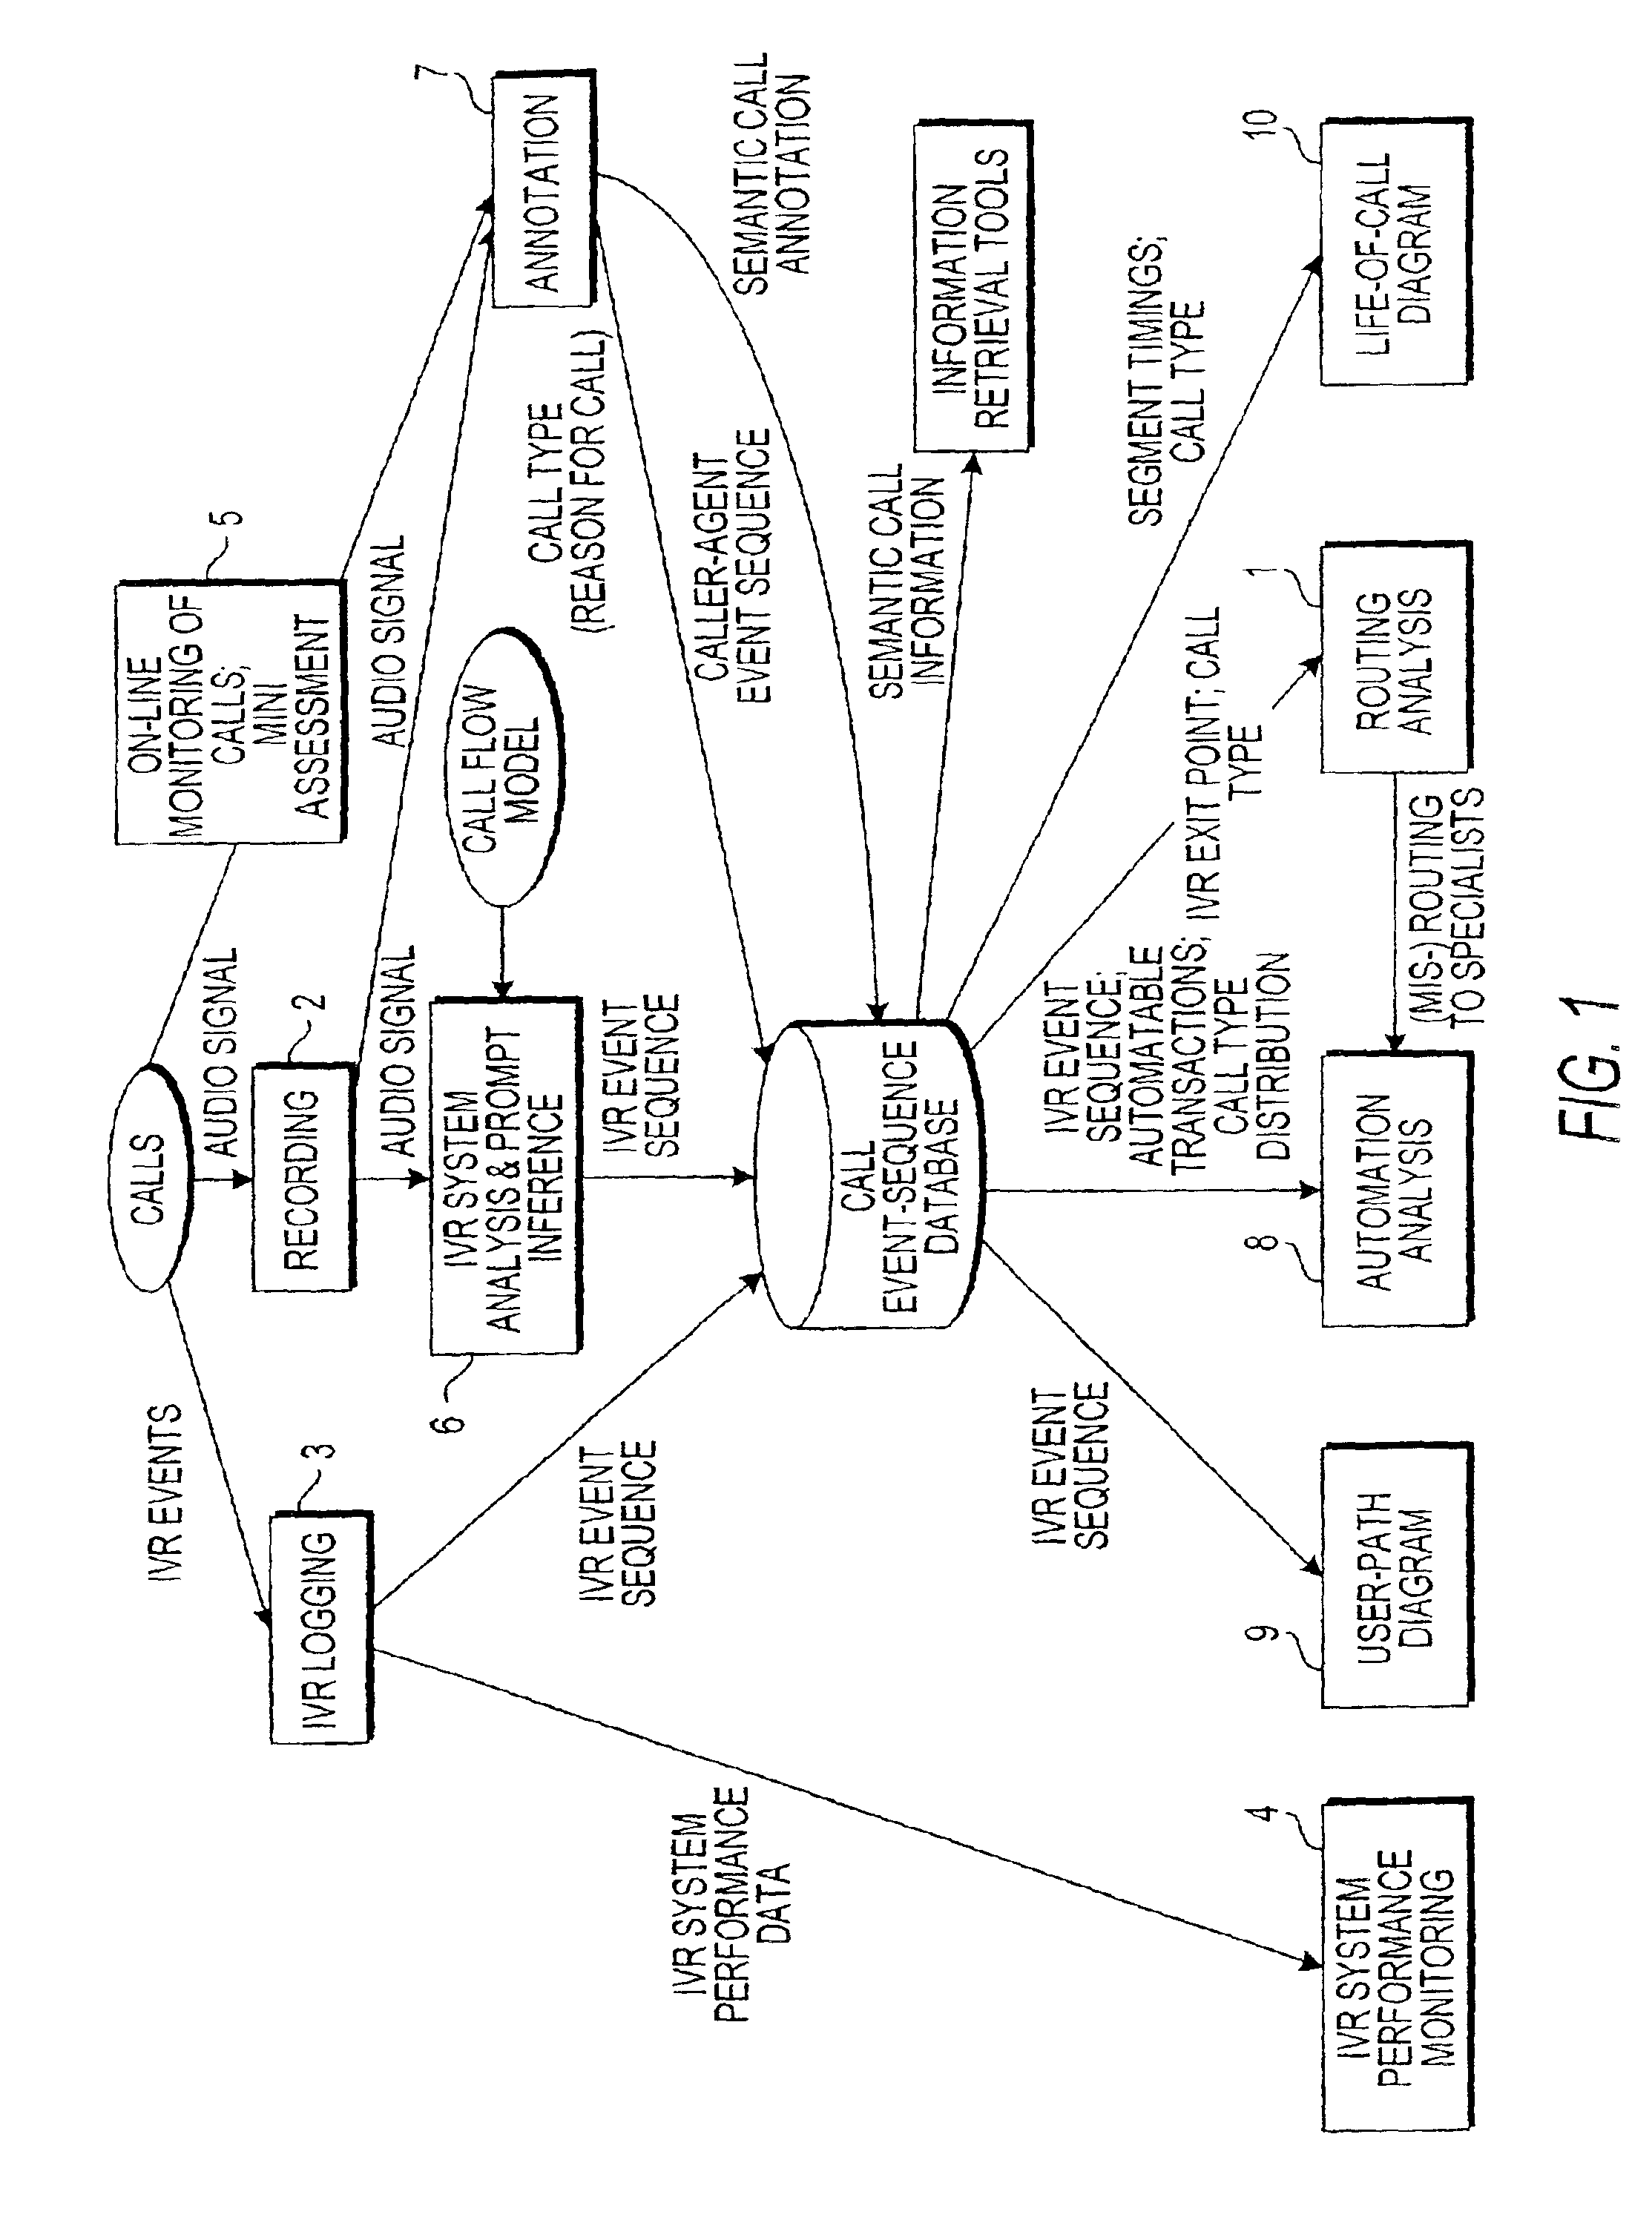 System and method for annotating recorded information from contacts to contact center